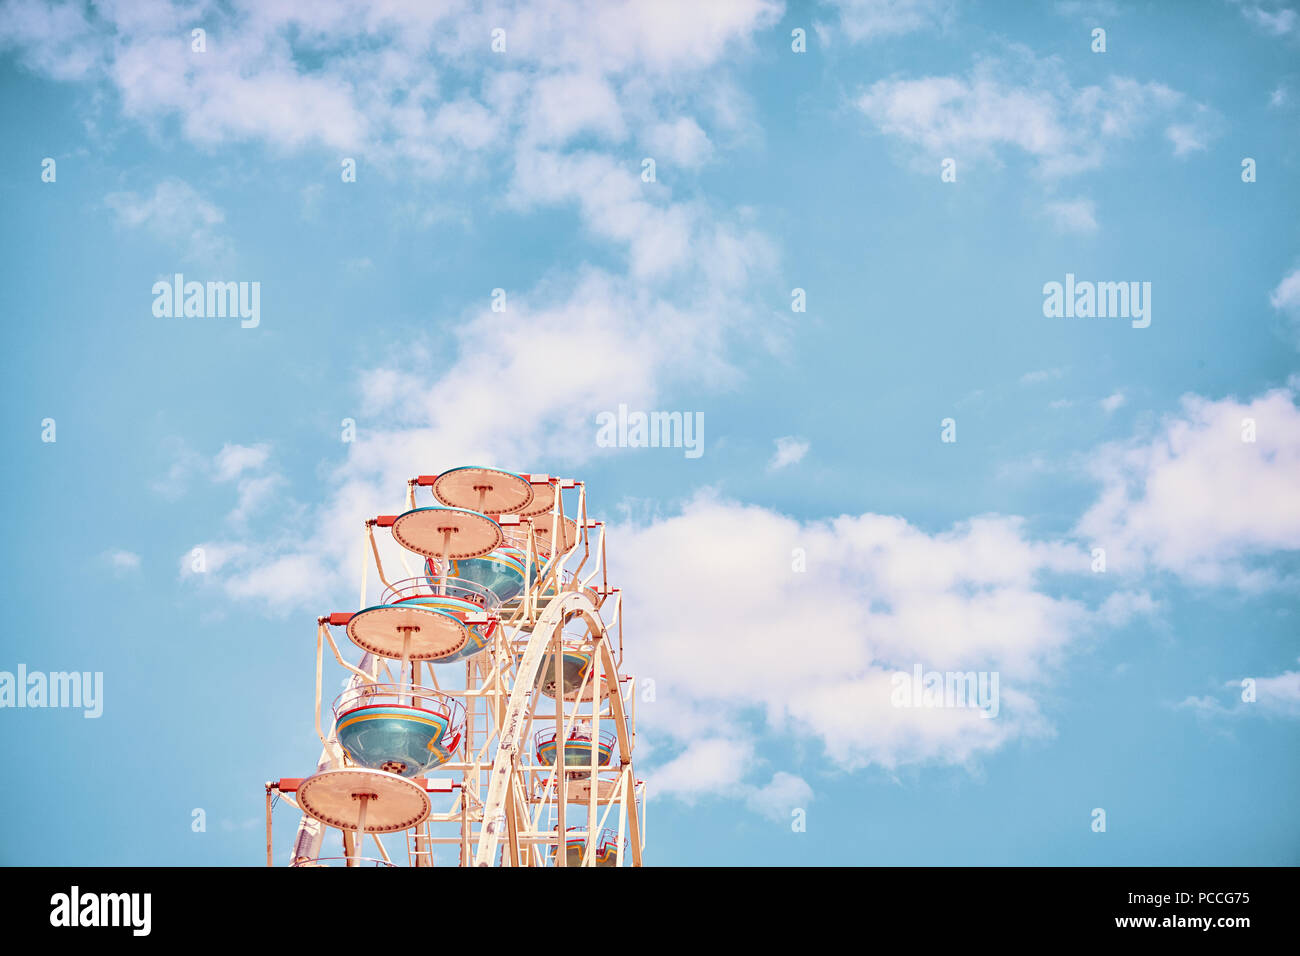 Retro stylized picture of a Ferris wheel against sky, space for text. Stock Photo